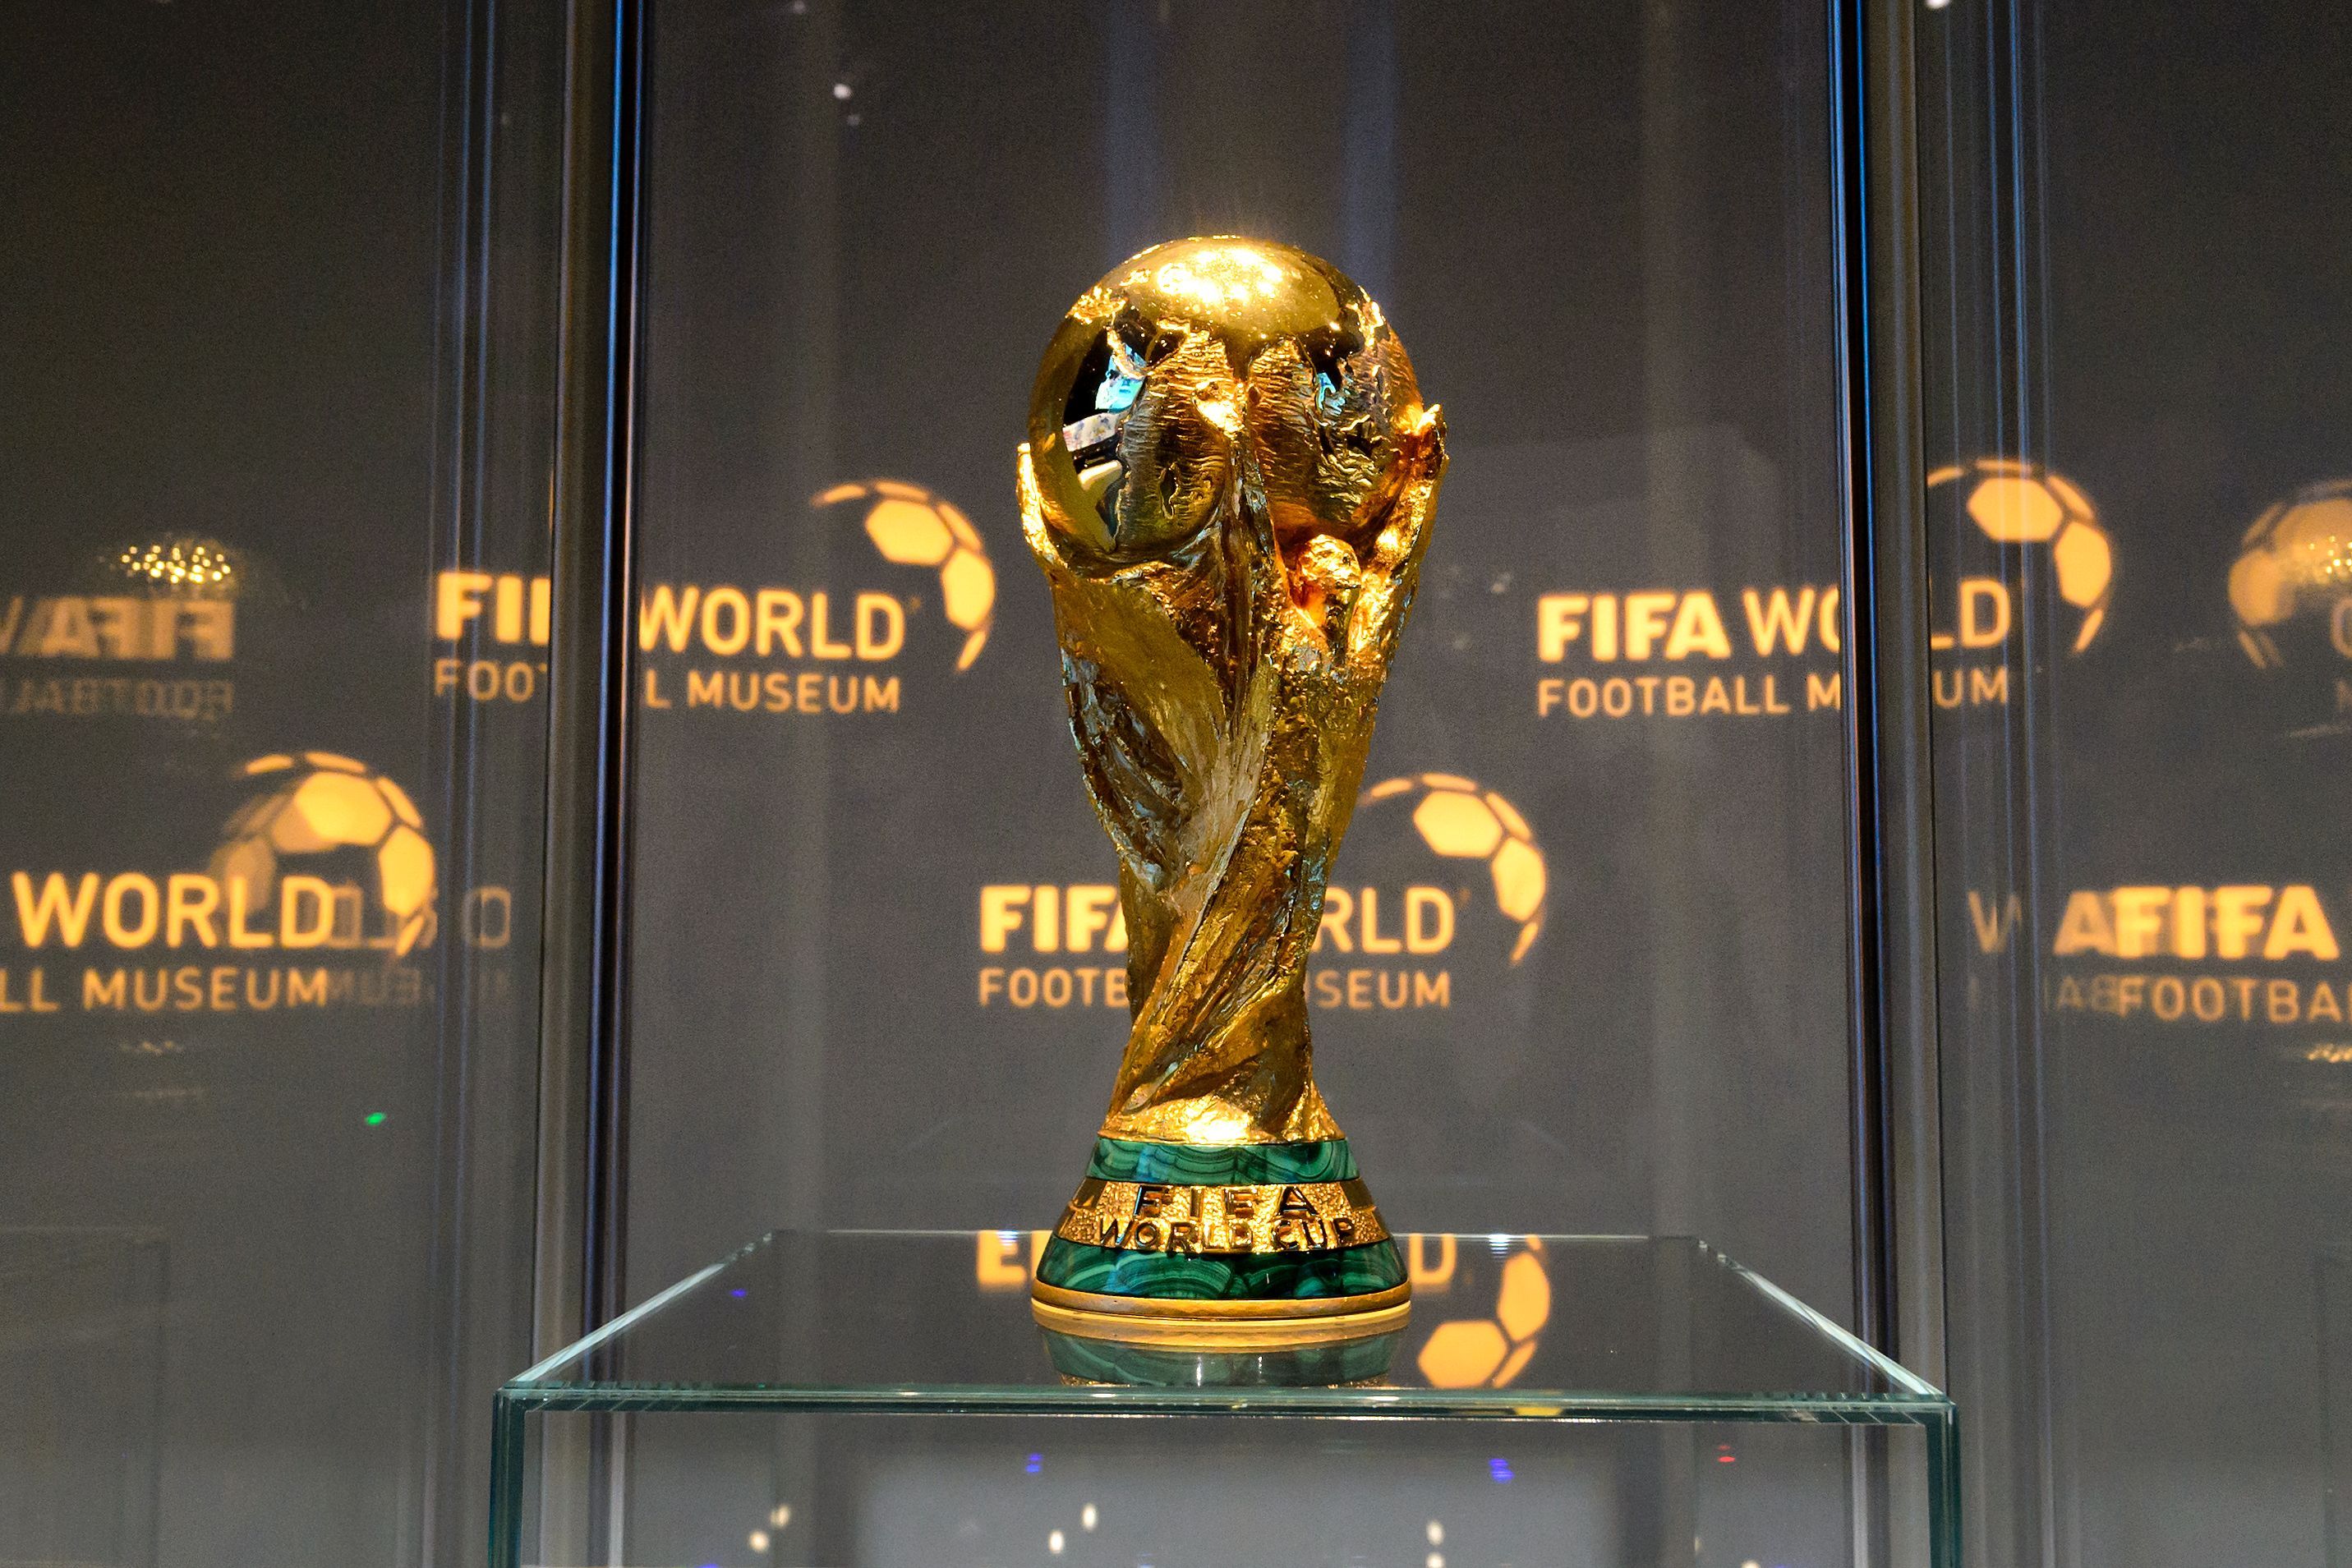 World Cup 2026: United States, Canada and Mexico Win Bid to Be